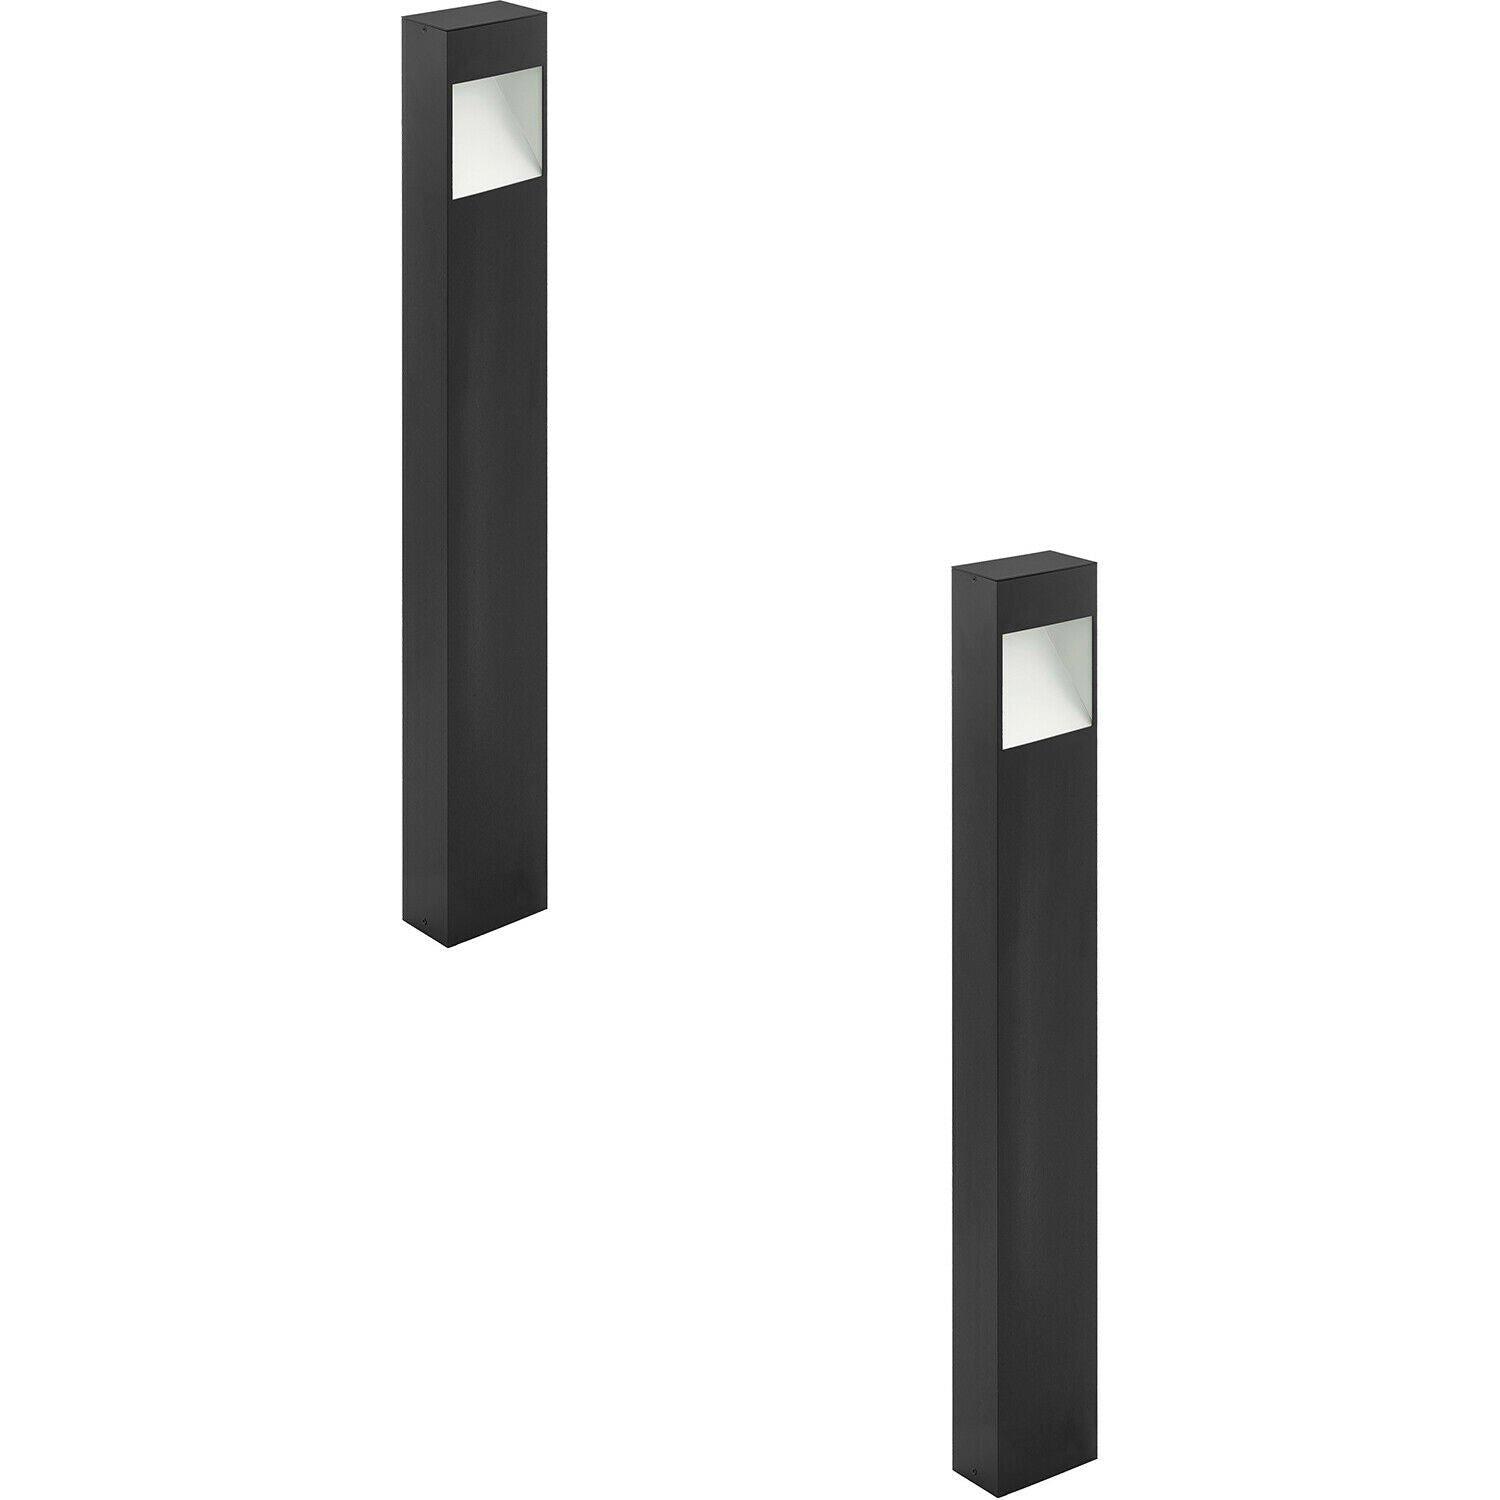 2 PACK IP44 Outdoor Pedestal Light Anthracite Tall Square Post 10W LED